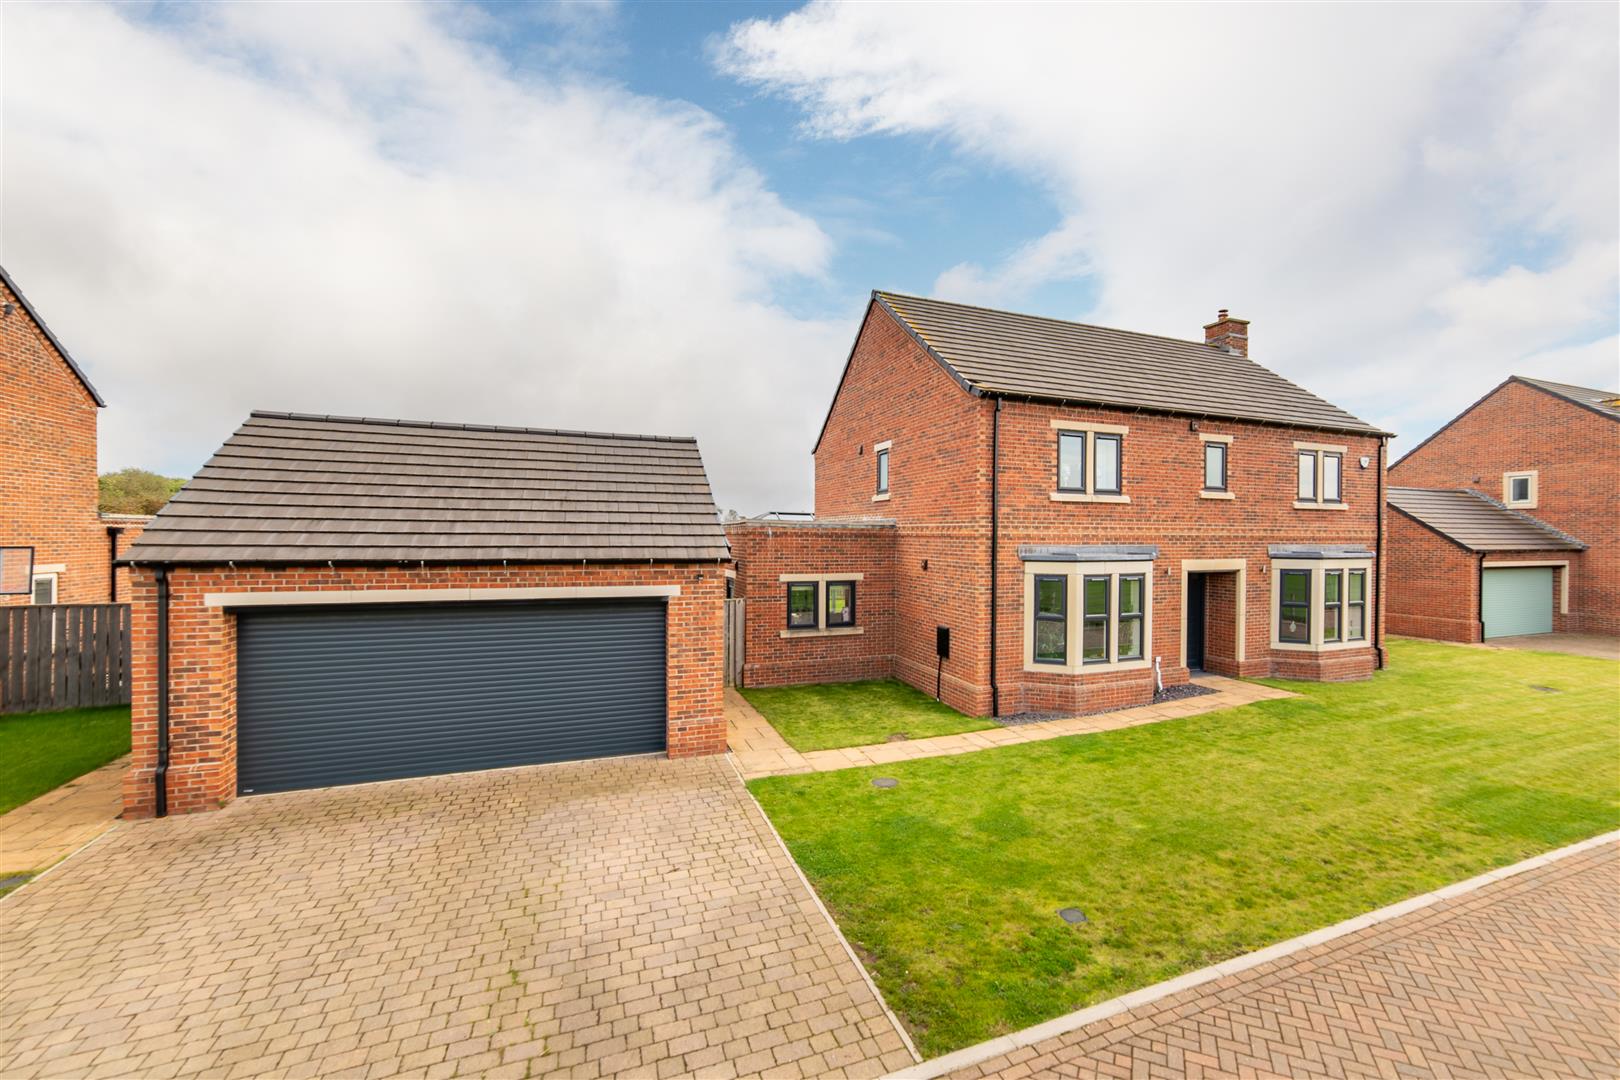 4 bed detached house for sale in Field View, Newcastle Upon Tyne - Property Image 1